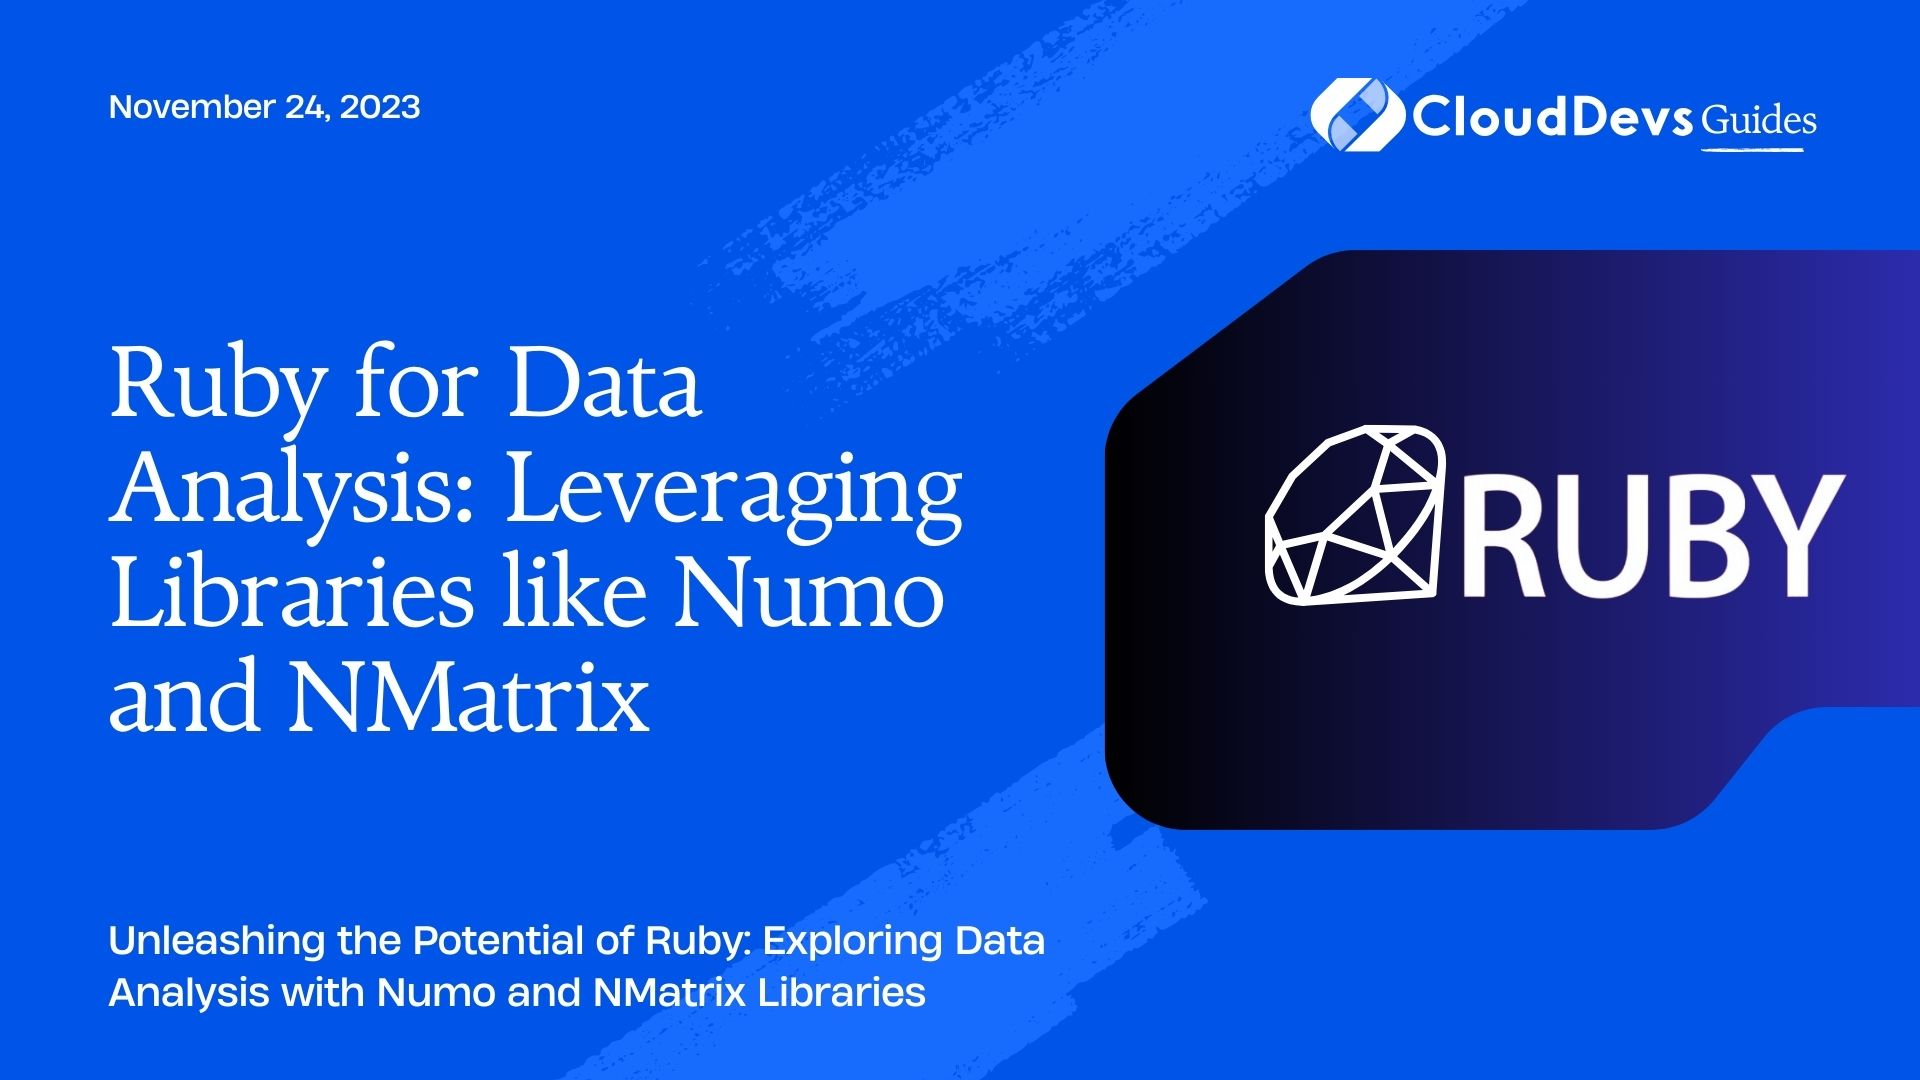 Ruby for Data Analysis: Leveraging Libraries like Numo and NMatrix